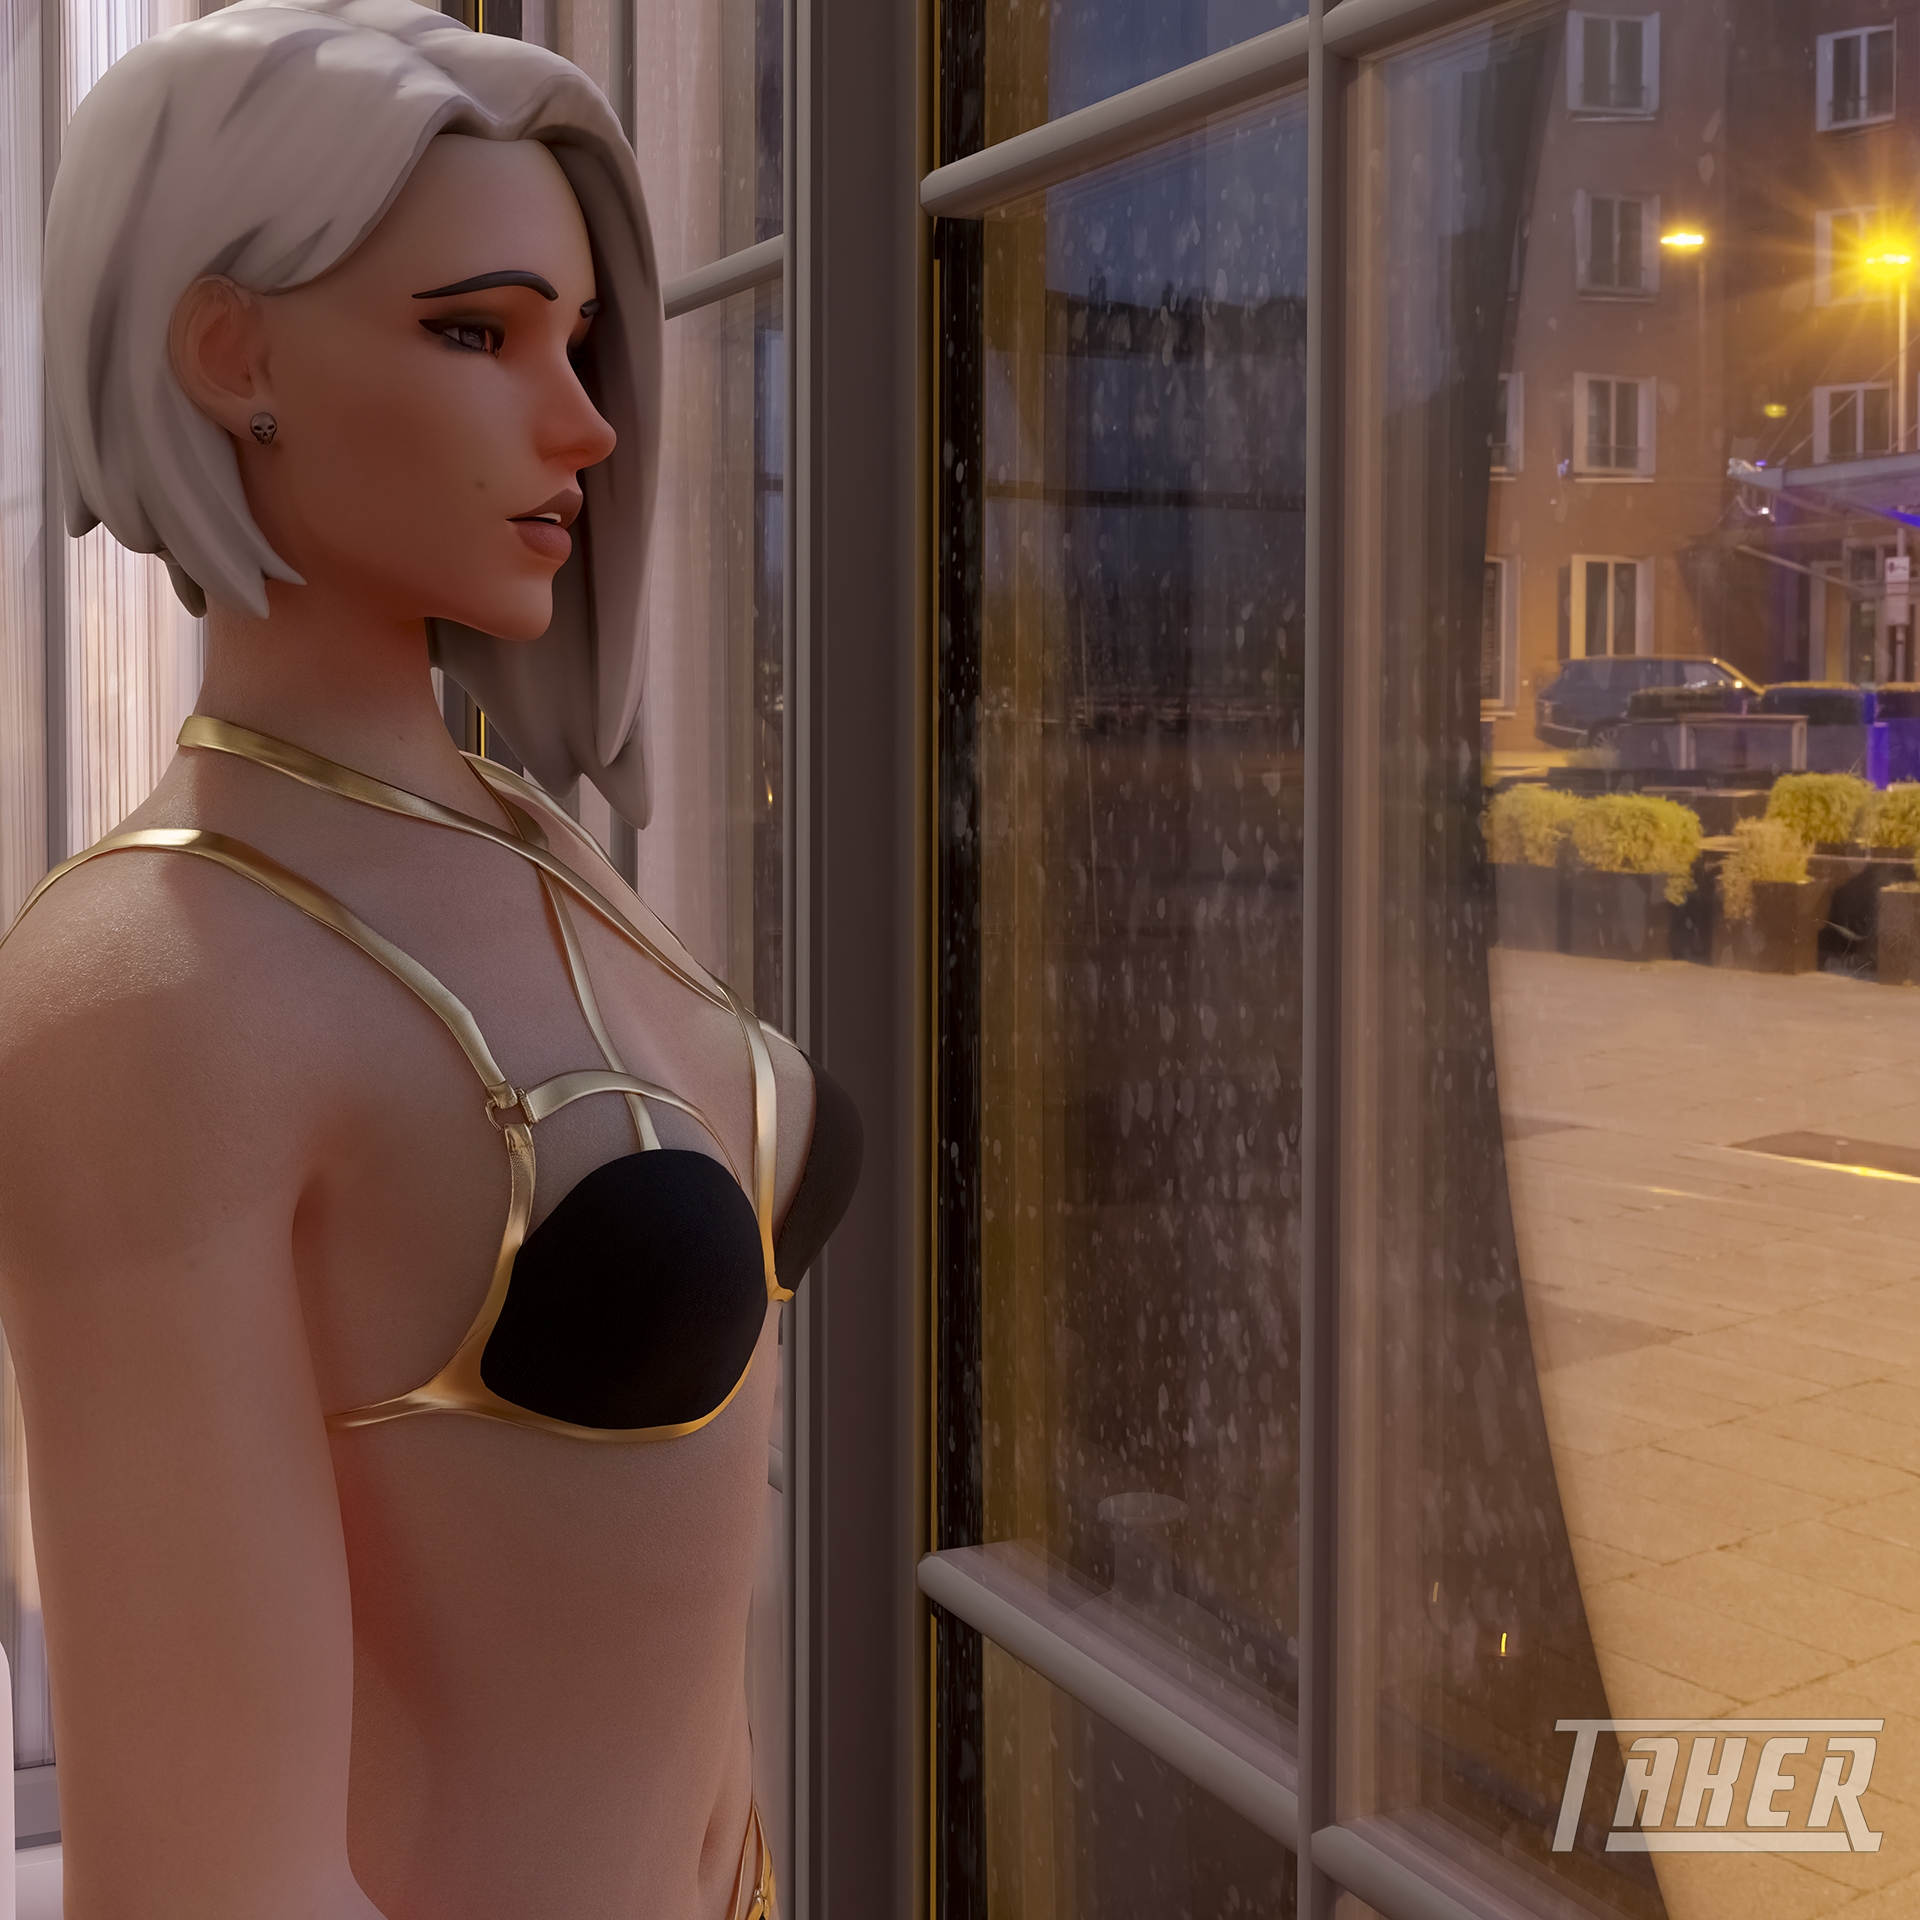 Where is he ?! Overwatch Ashe 3d Porn Natural Boobs Natural Tits Pose Nipples Outdoor Naked